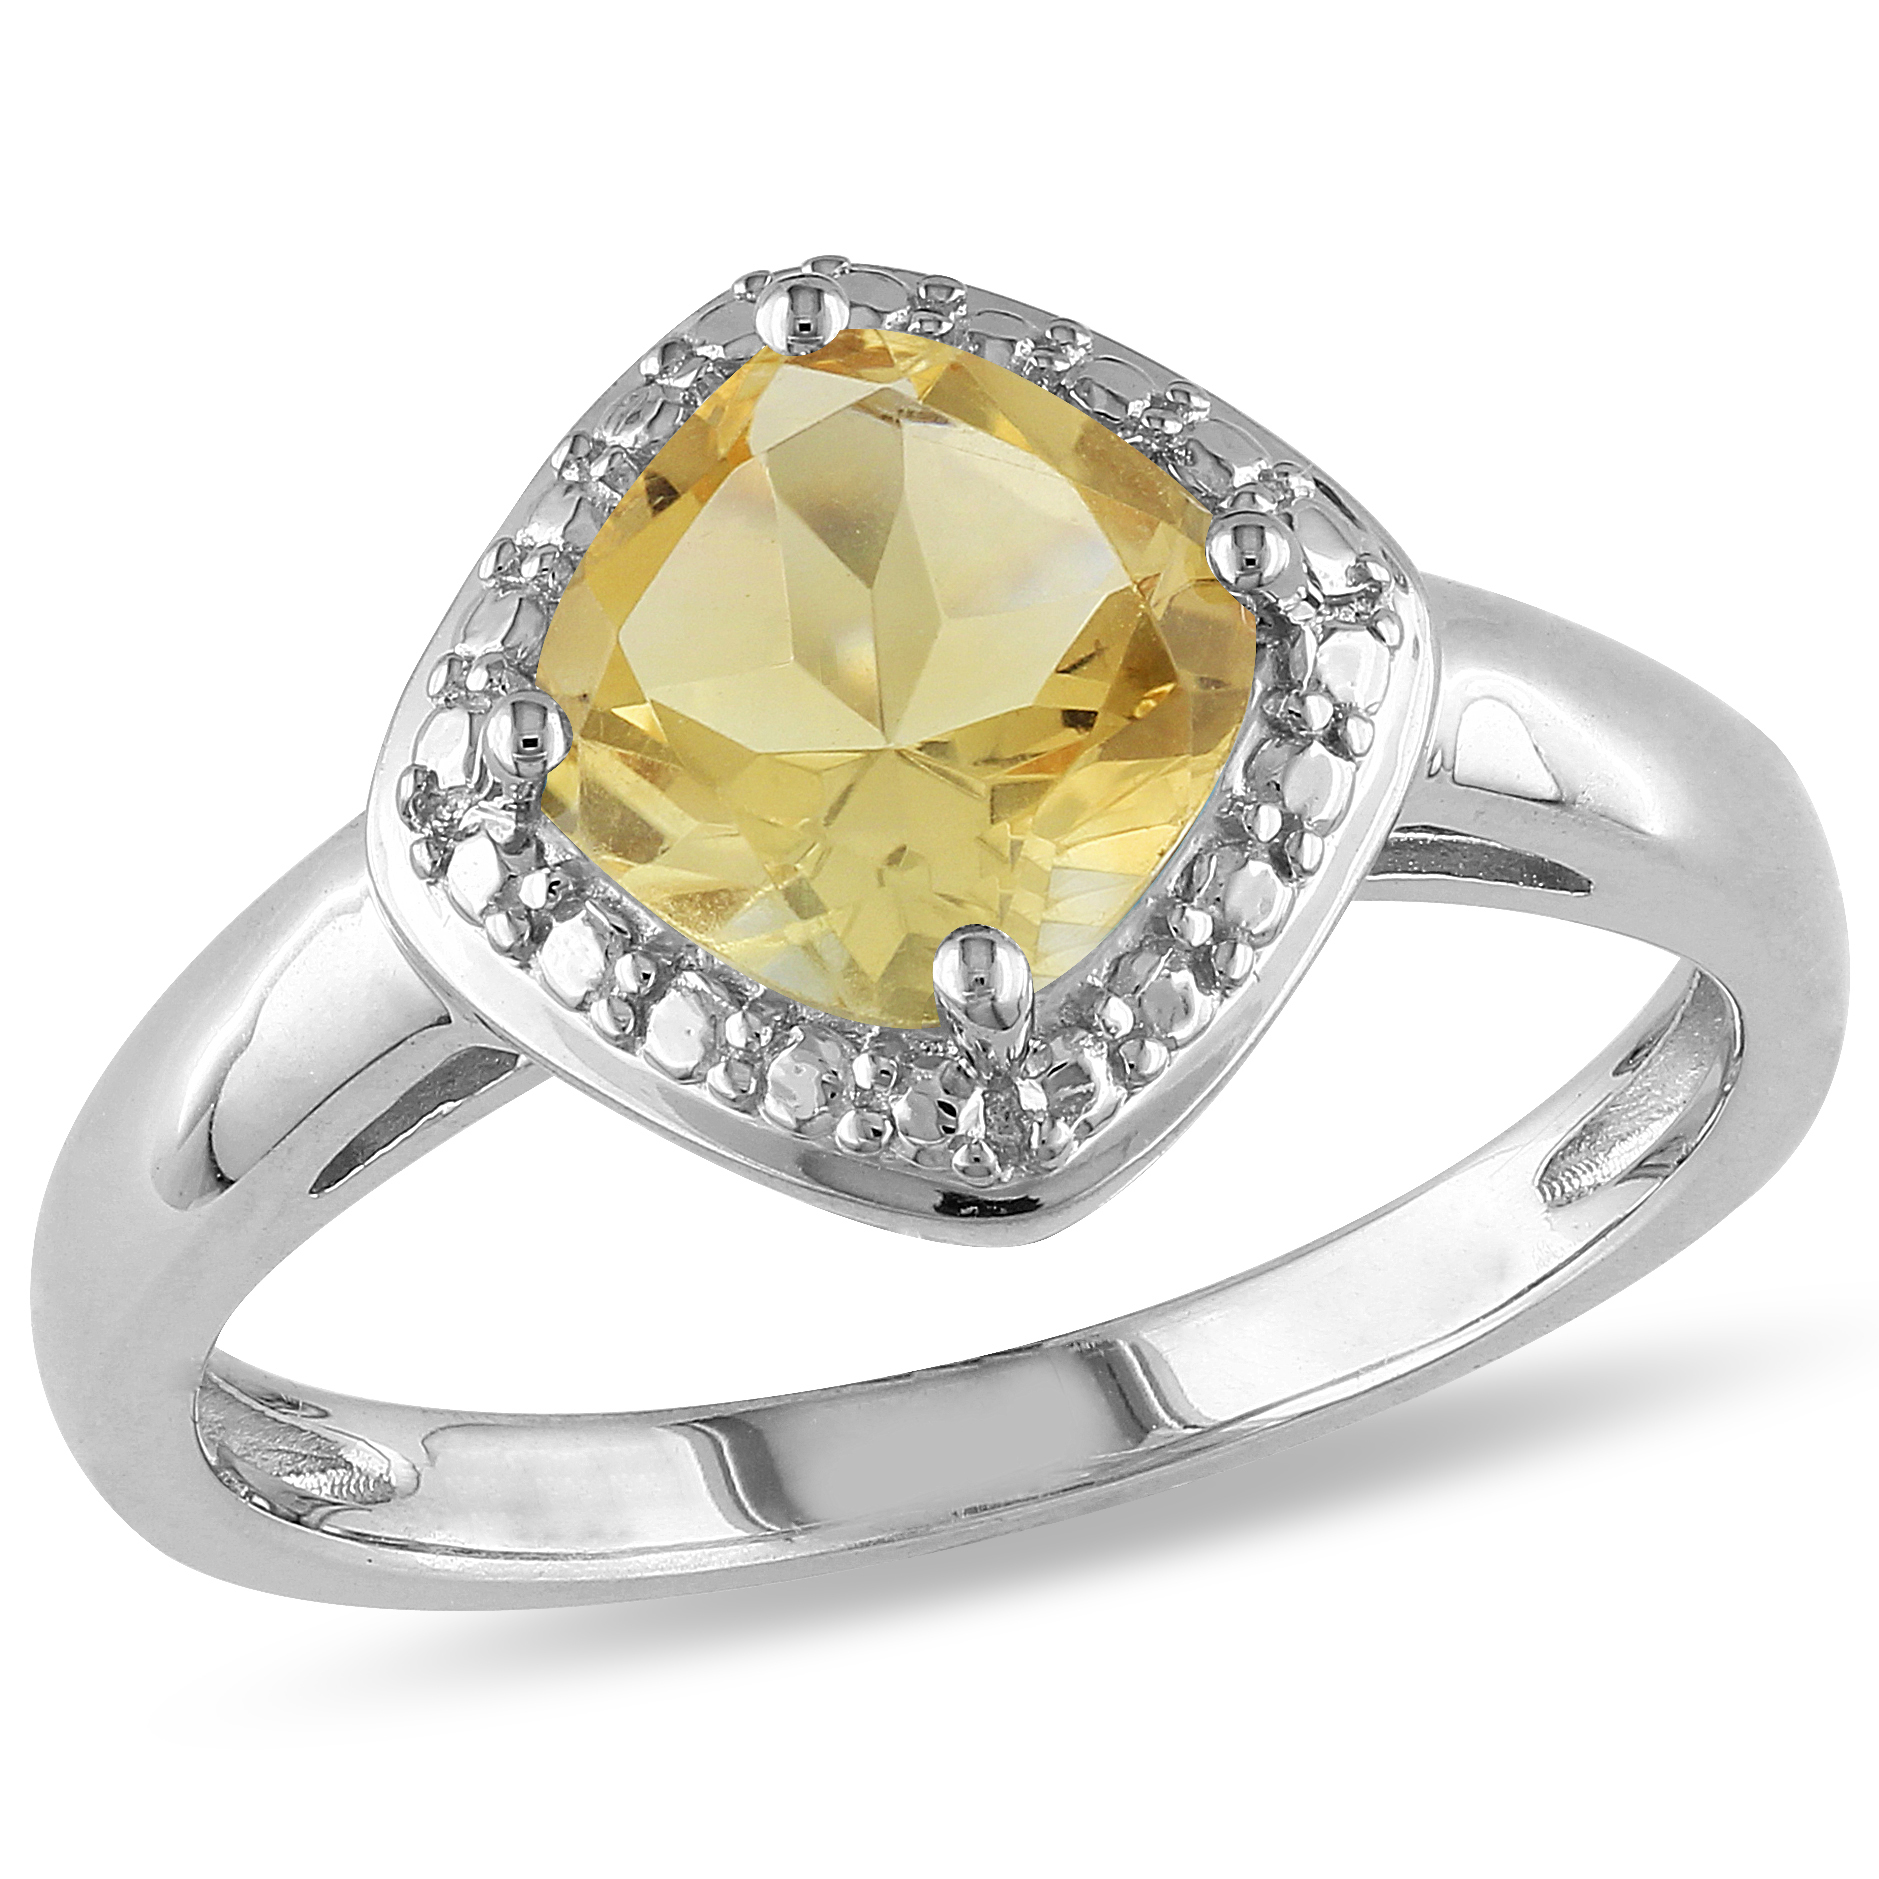 Amour 1 1/4 Carat T.G.W. Citrine Fashion Ring in Sterling Silver